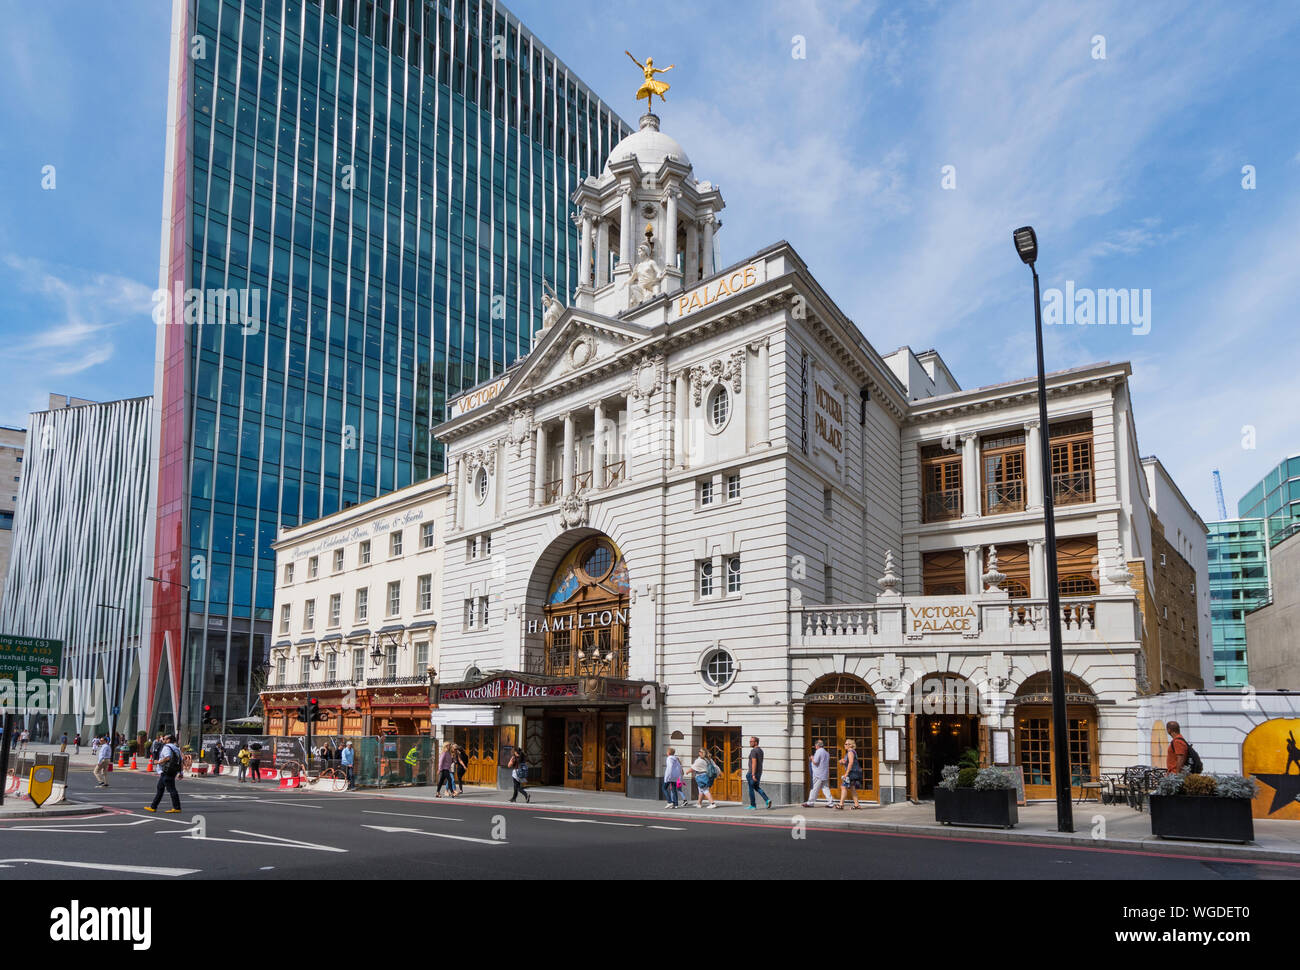 Victoria Palace Theatre in Victoria Street, City of Westminster, London, England, UK. Stock Photo